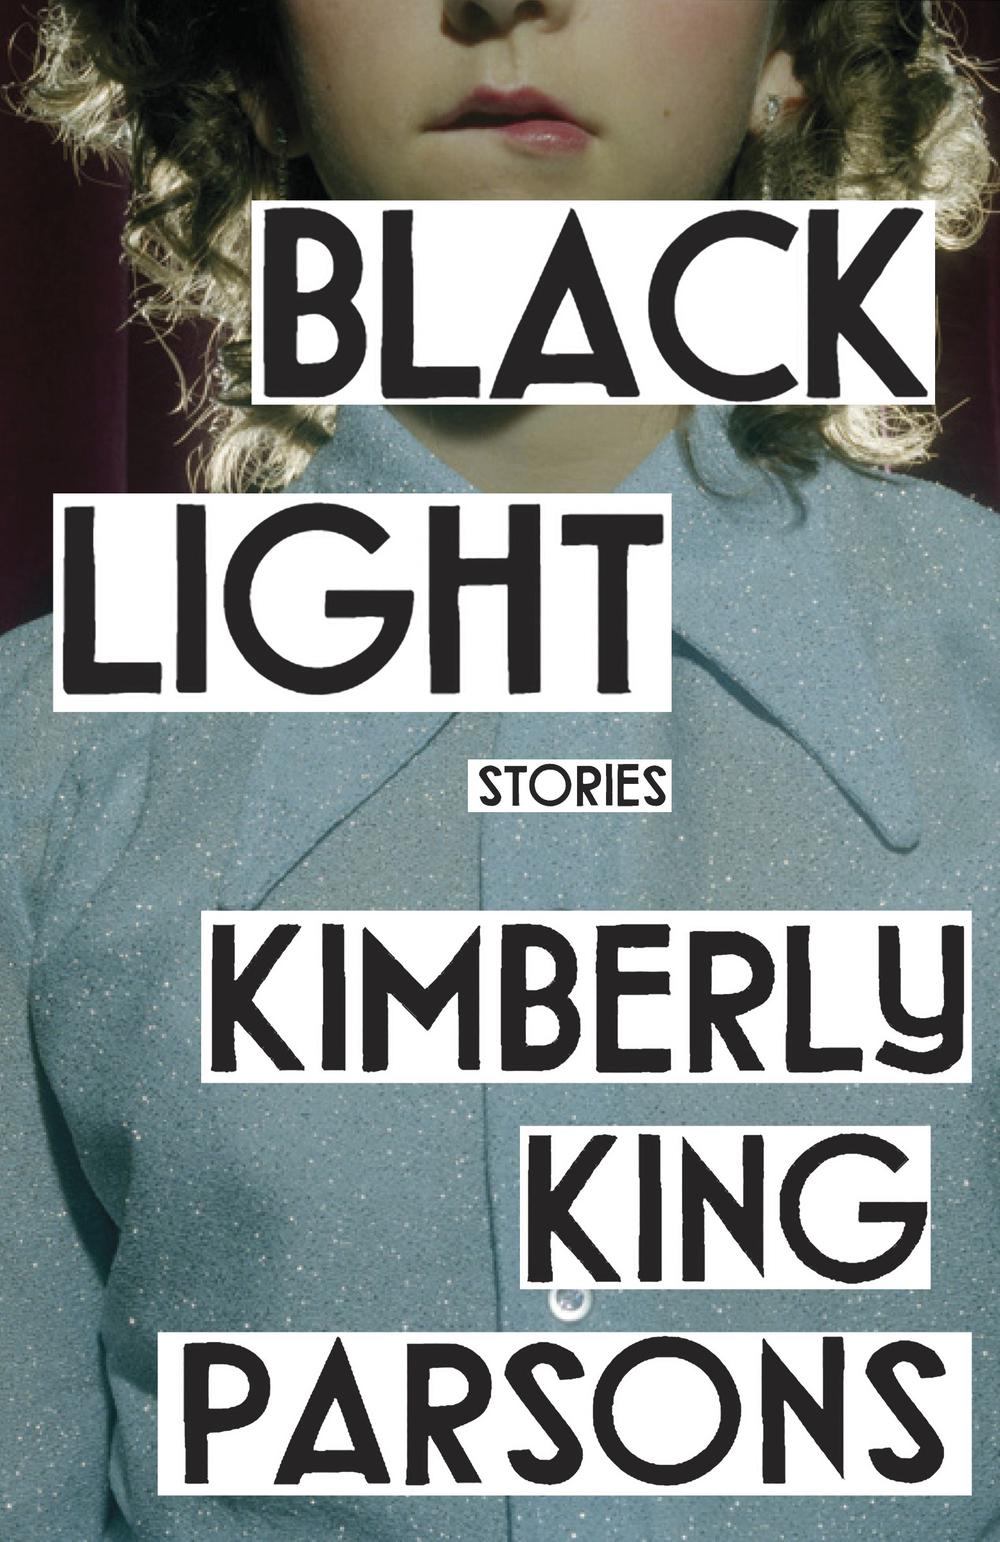 black light by kimberly king parsons